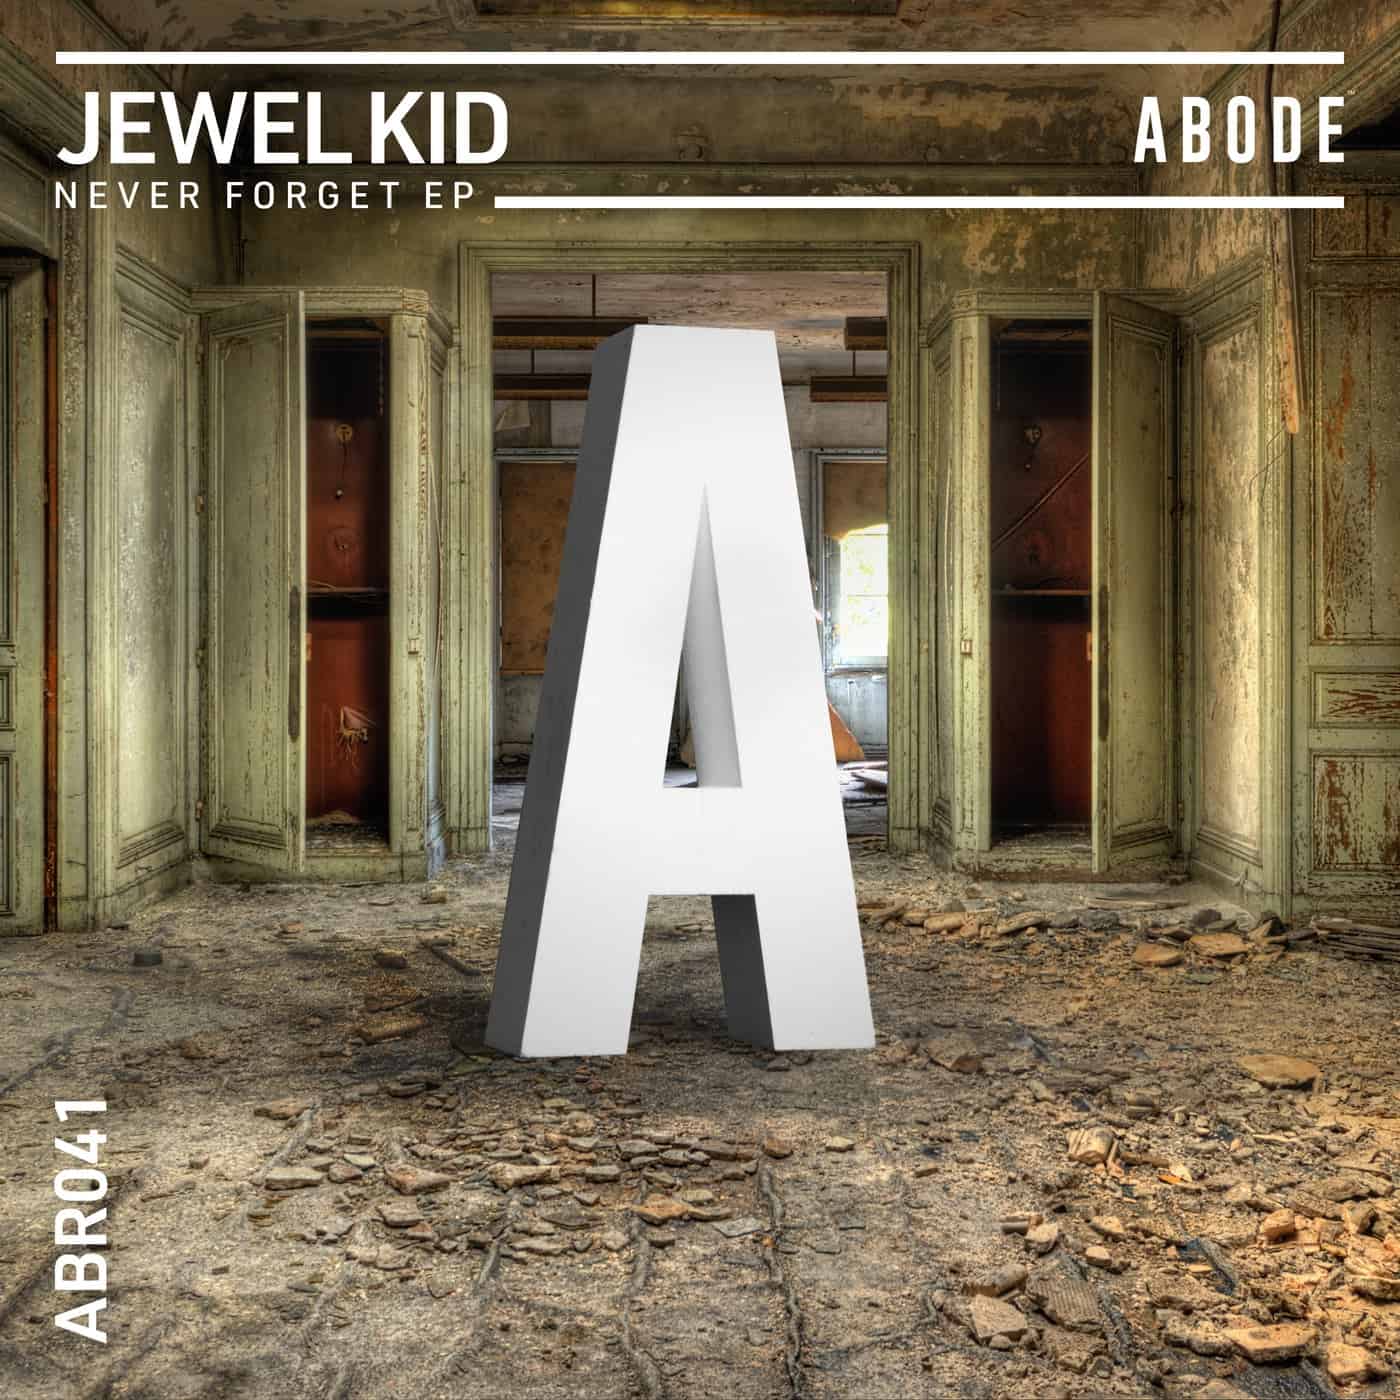 Download Jewel Kid - Never Forget EP on Electrobuzz